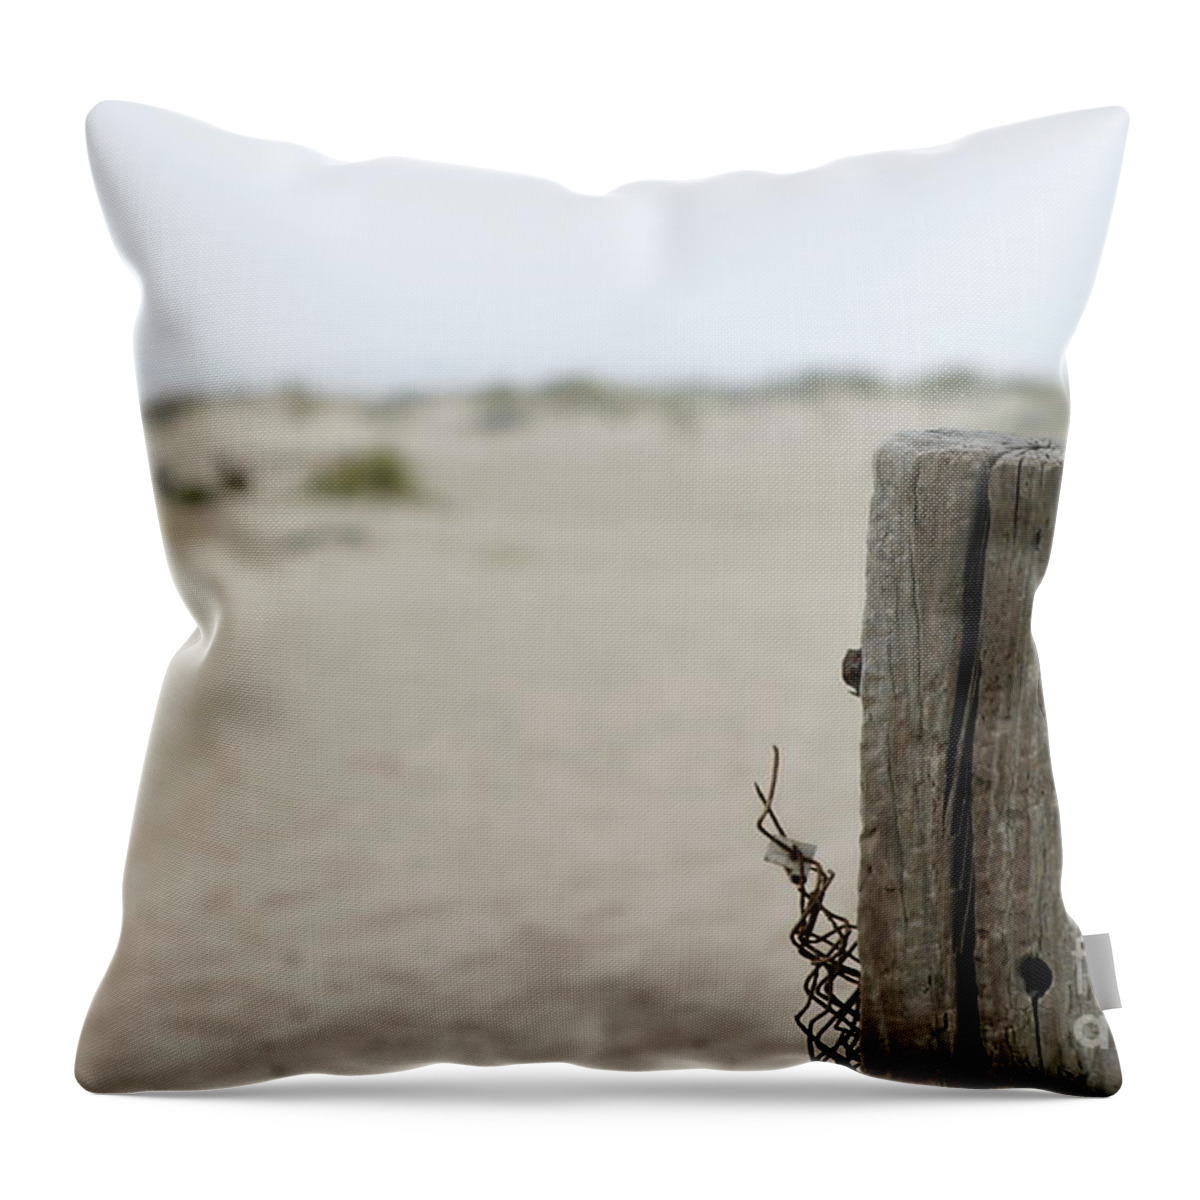 Old Throw Pillow featuring the photograph Old Fence Pole by Henrik Lehnerer